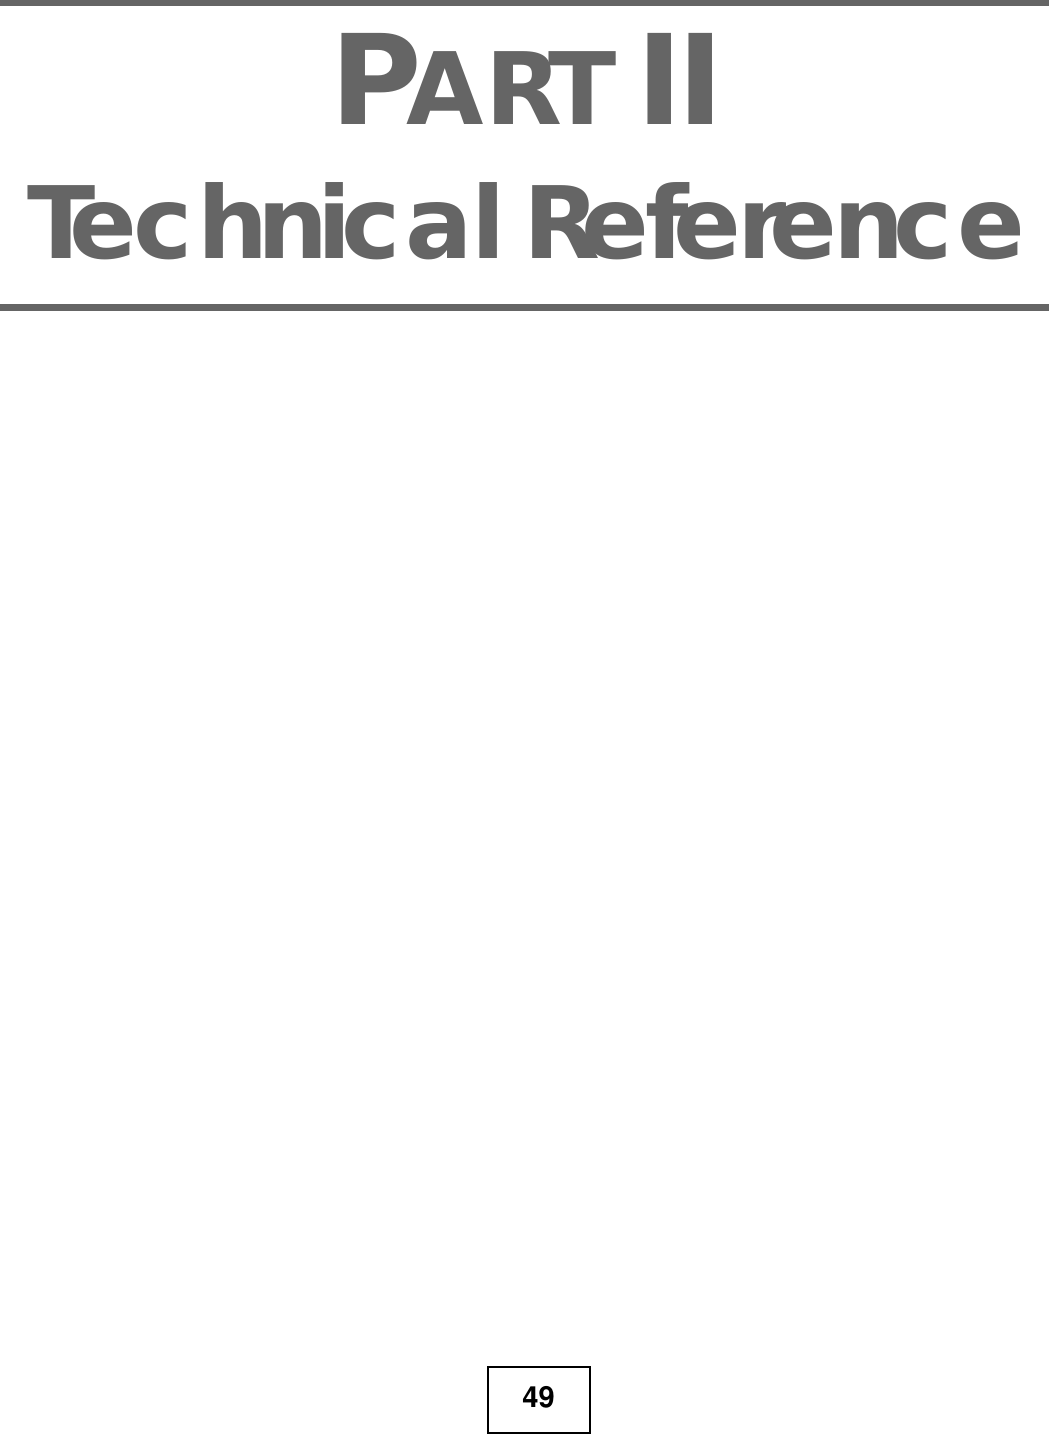 49PART IITechnical Reference